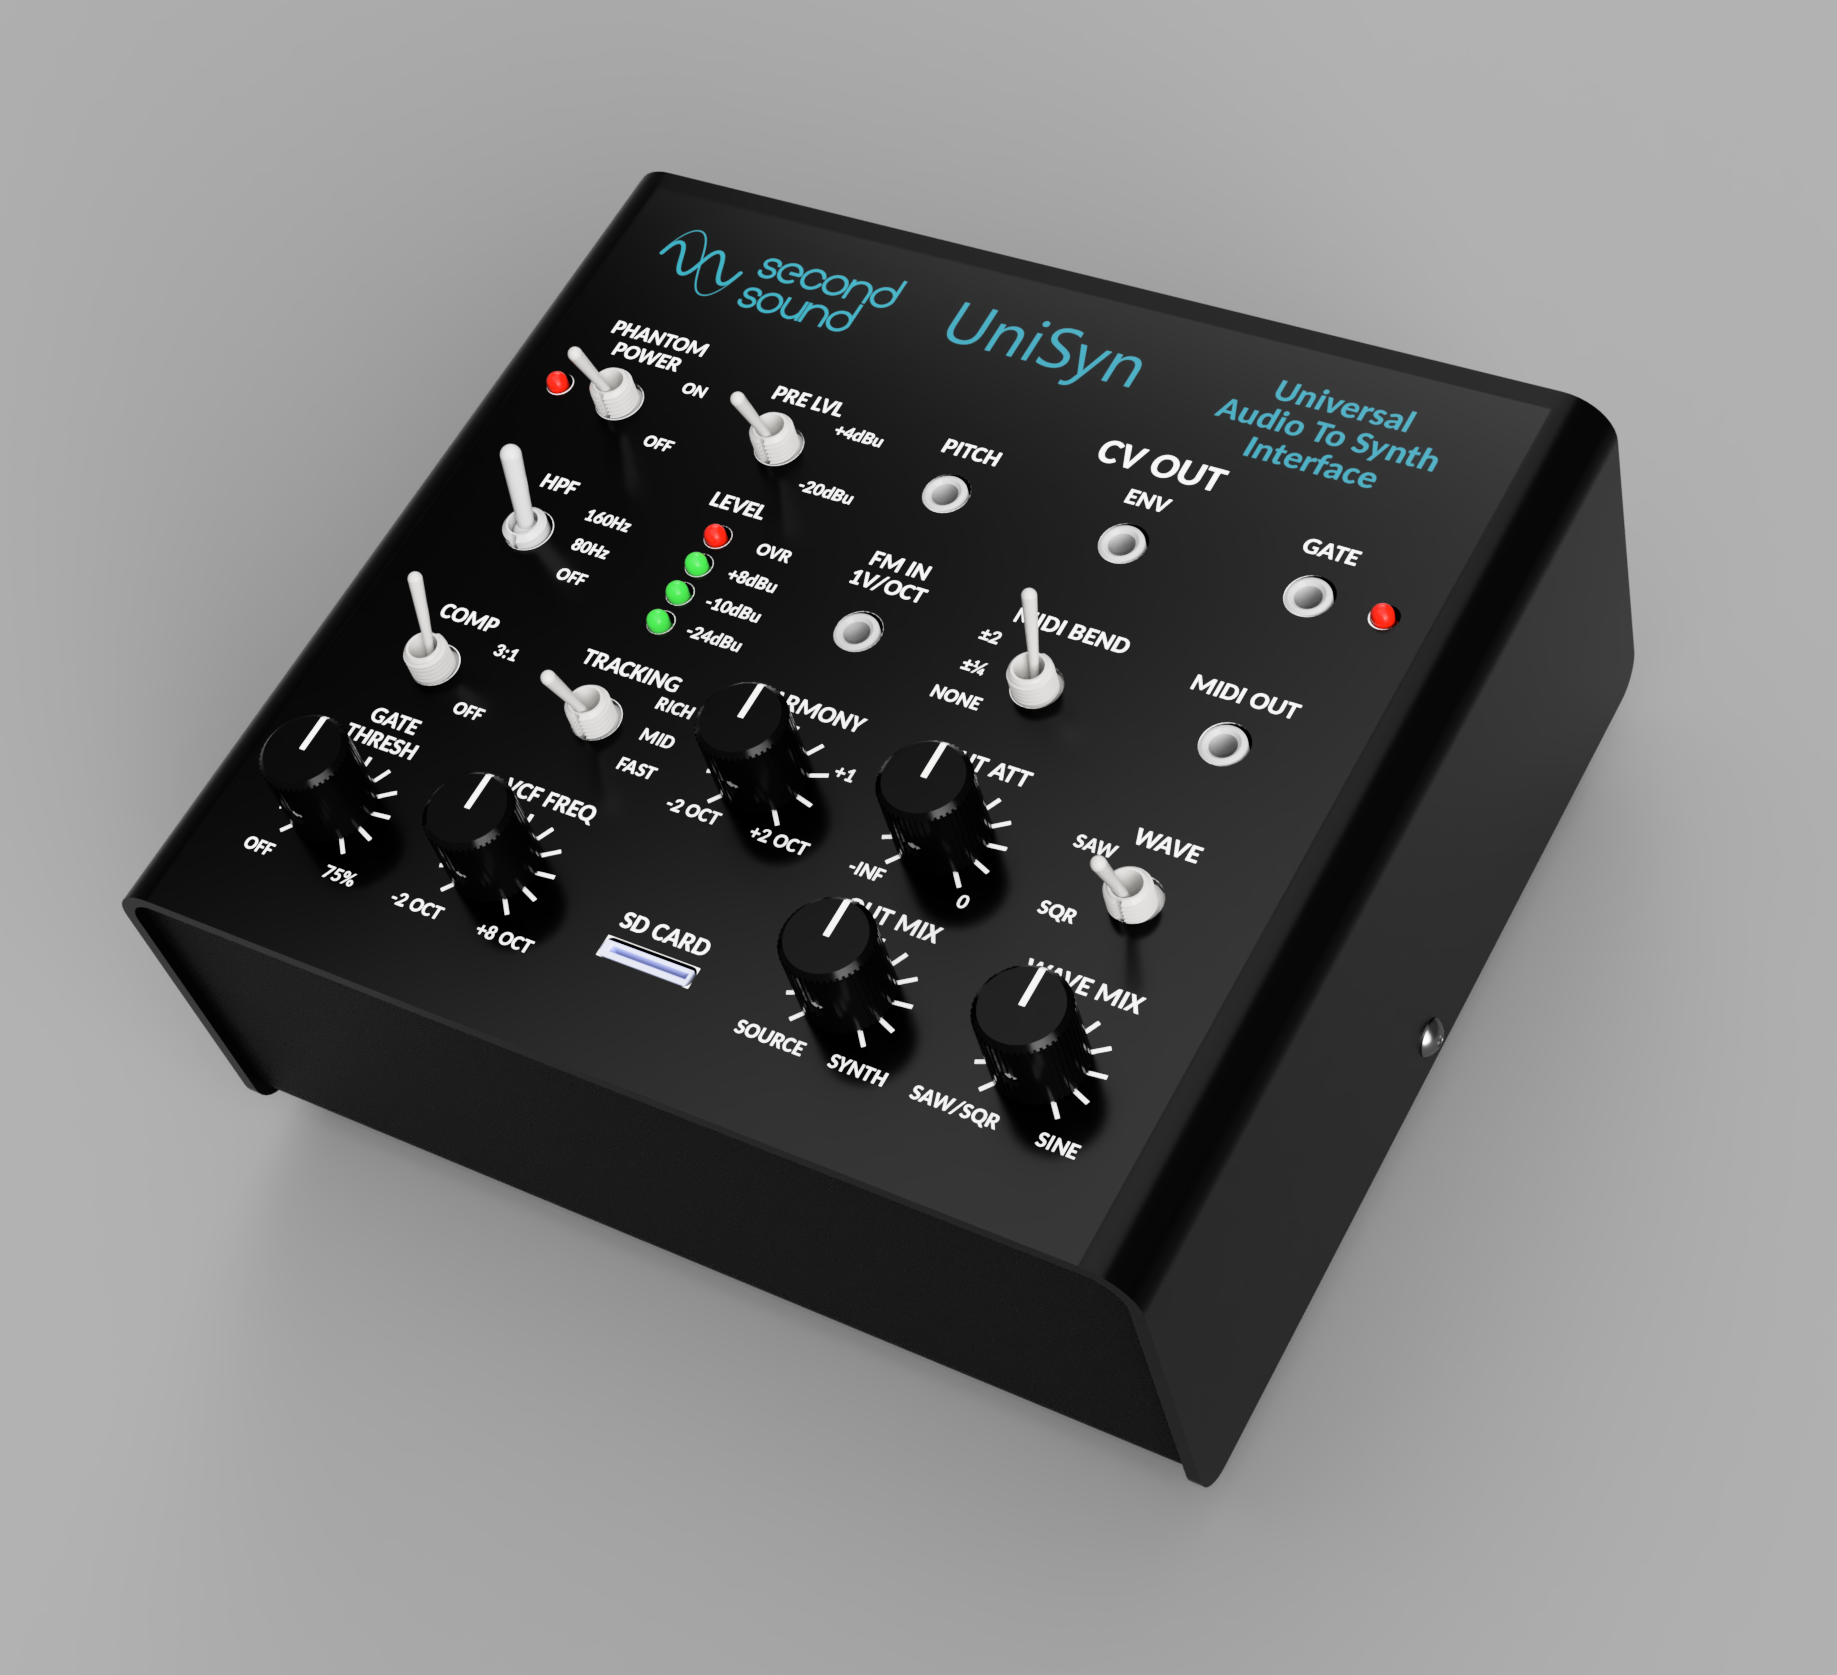 Midi Synth. Dr Synth Tracker. 11.2 Sound. Sounds 2.0